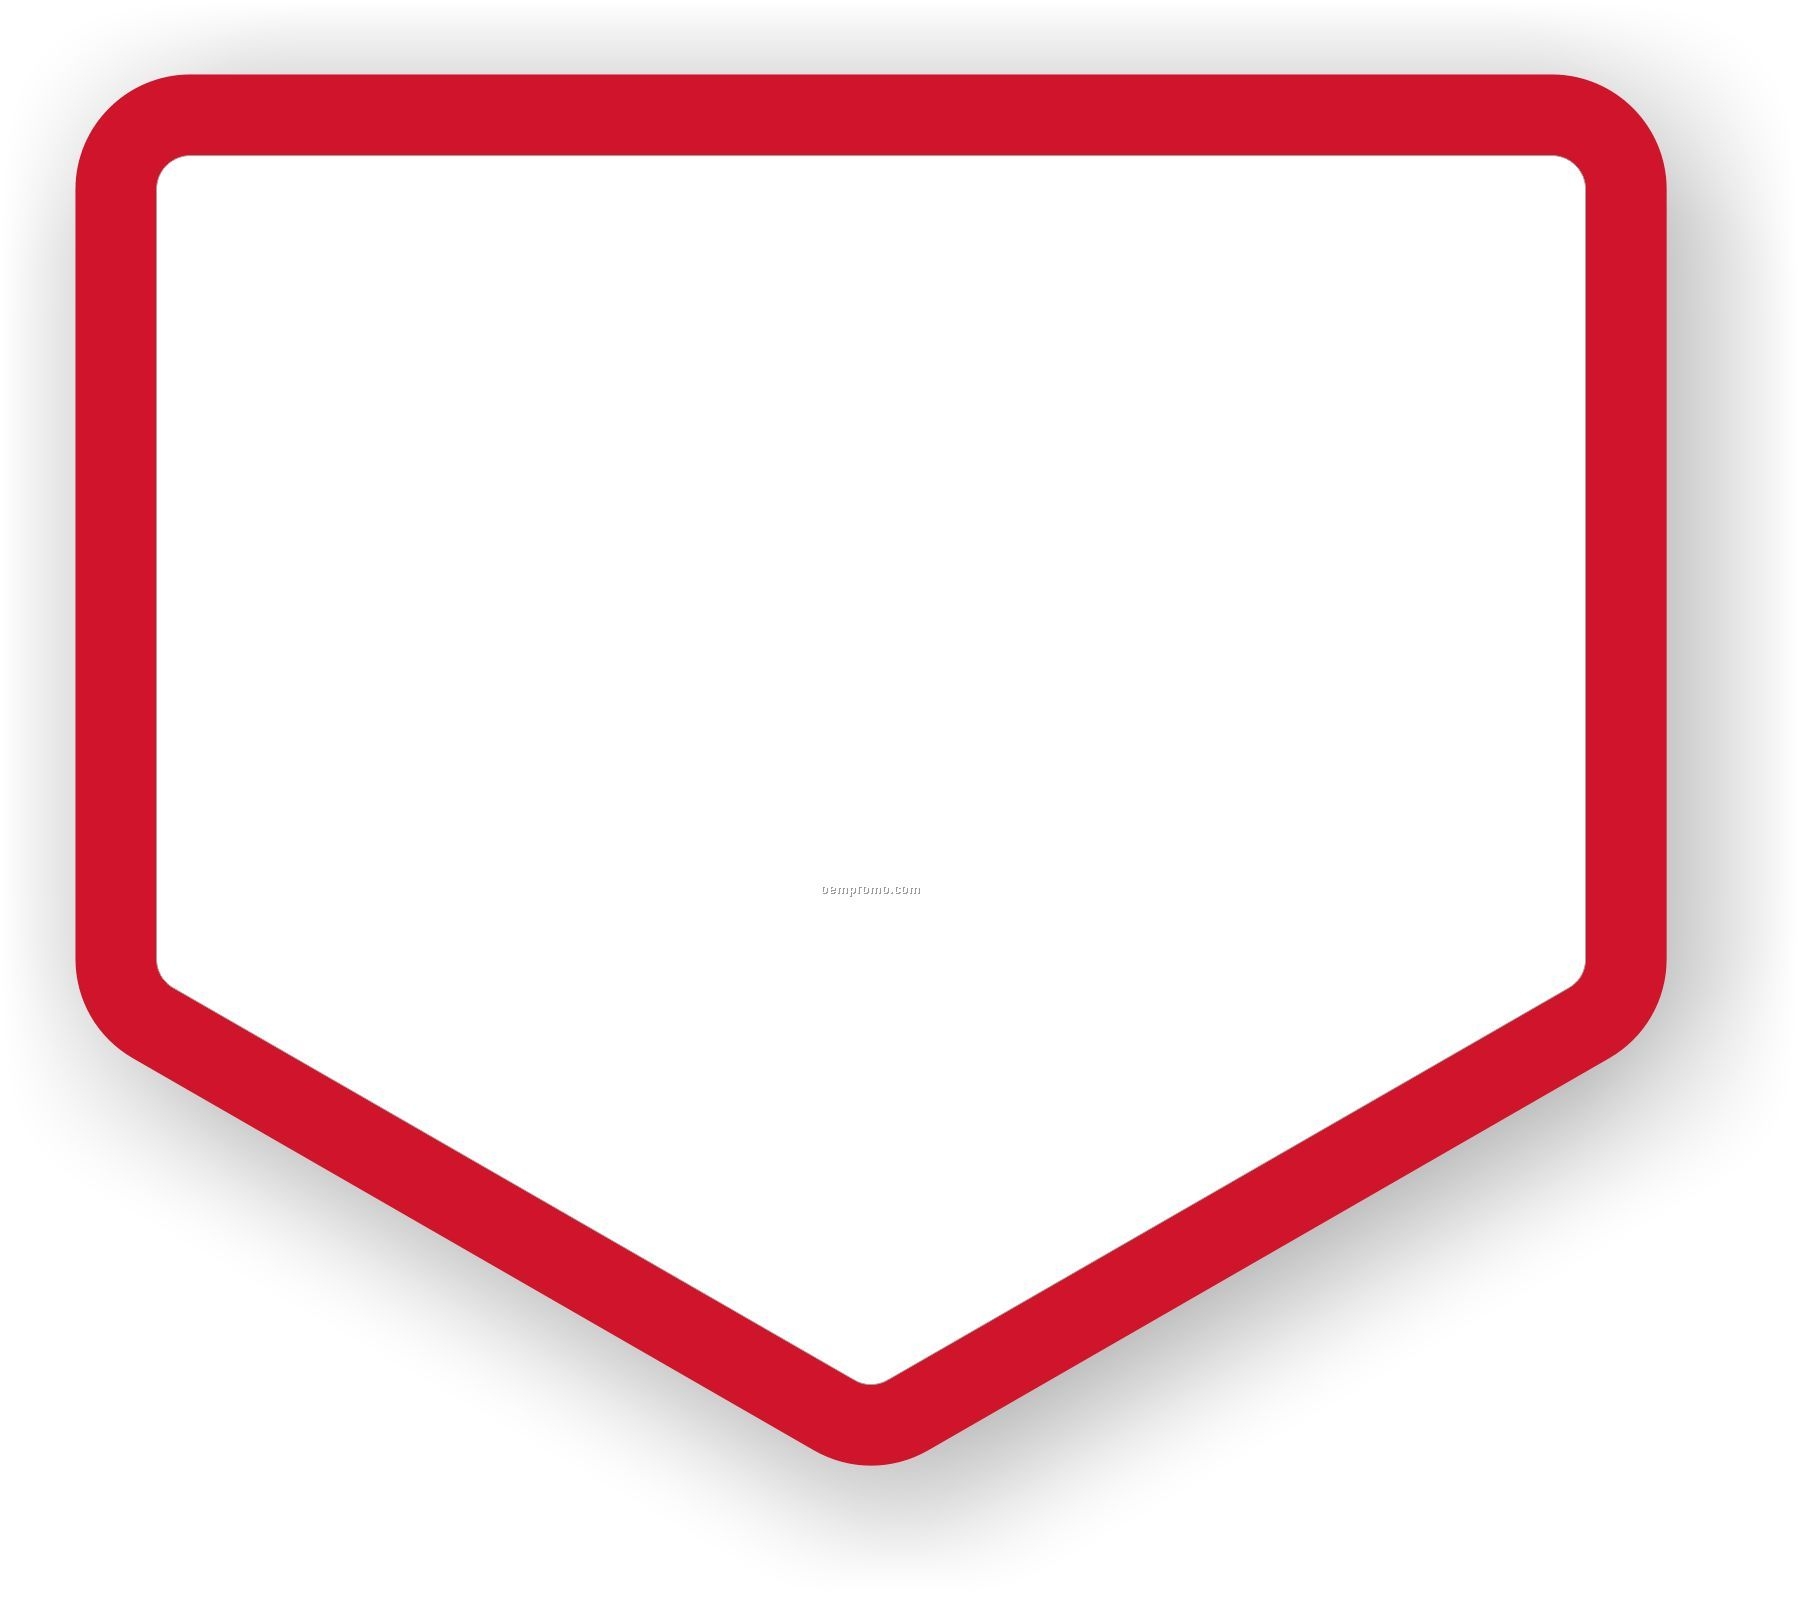 1800x1600 Best Of Home Plate Clipart Gallery.